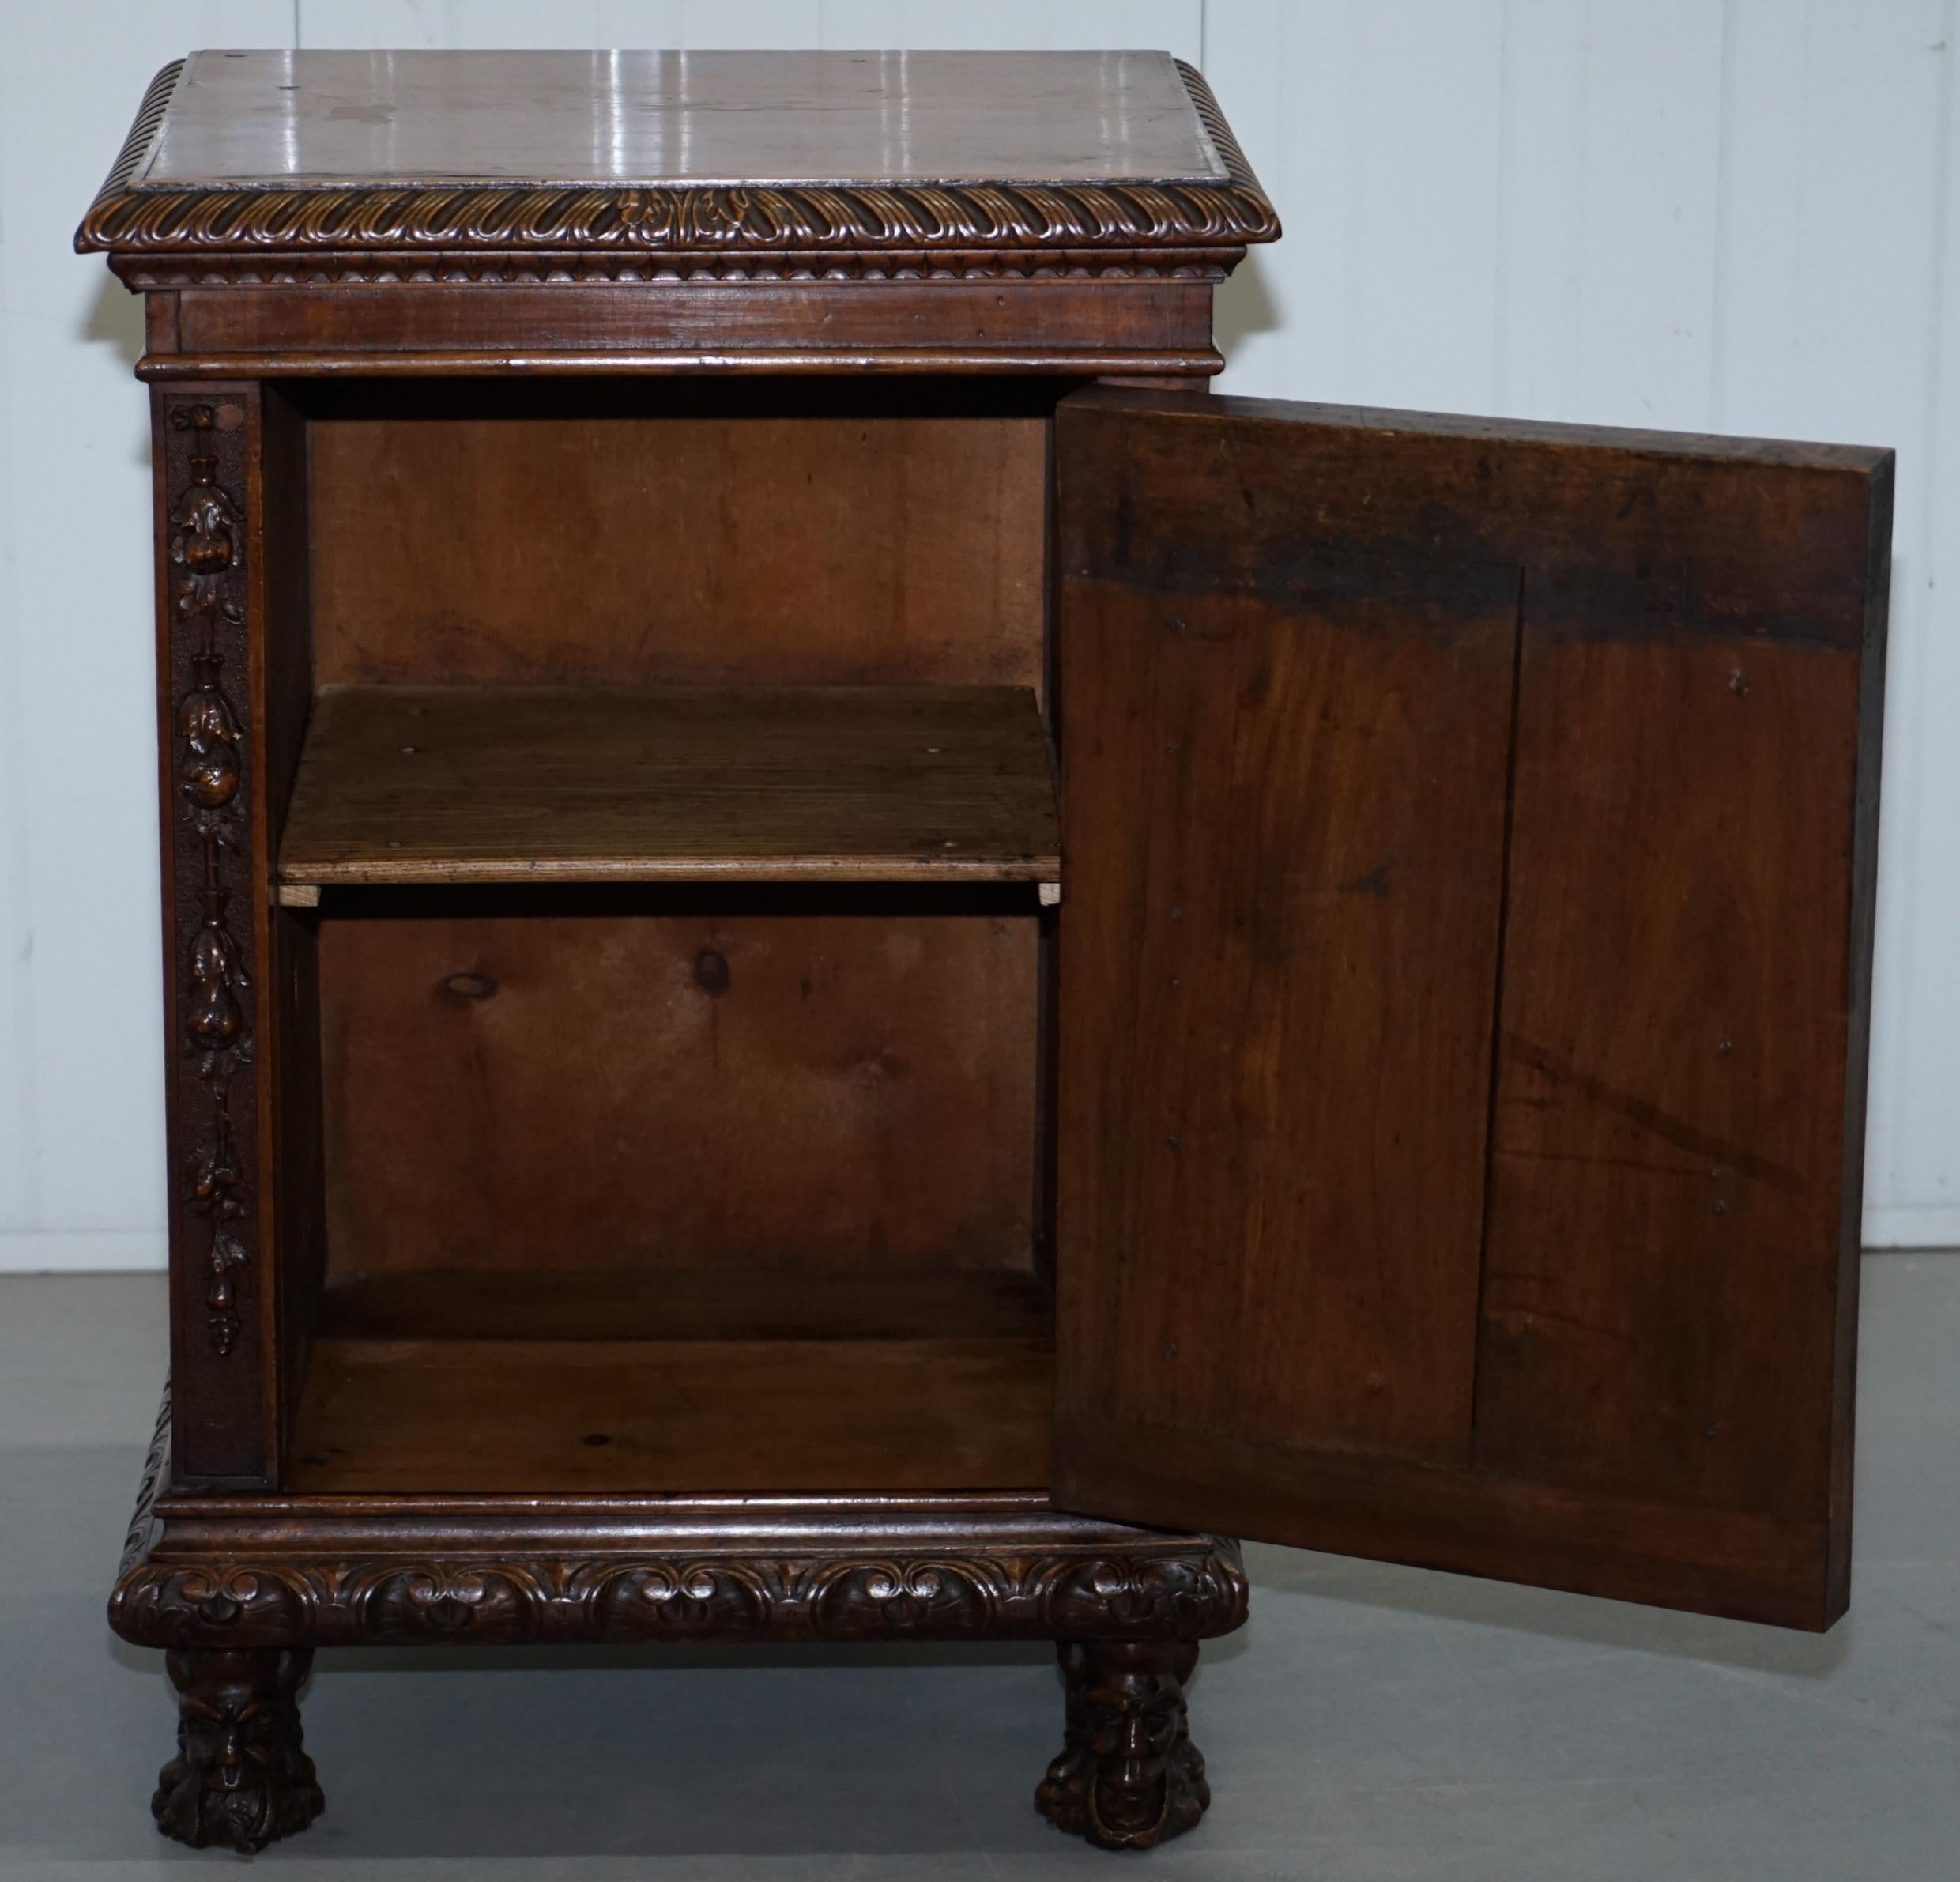 Stunning circa 1780 Carved Walnut Side Cabinet with Cherub & Floral Detailing 10